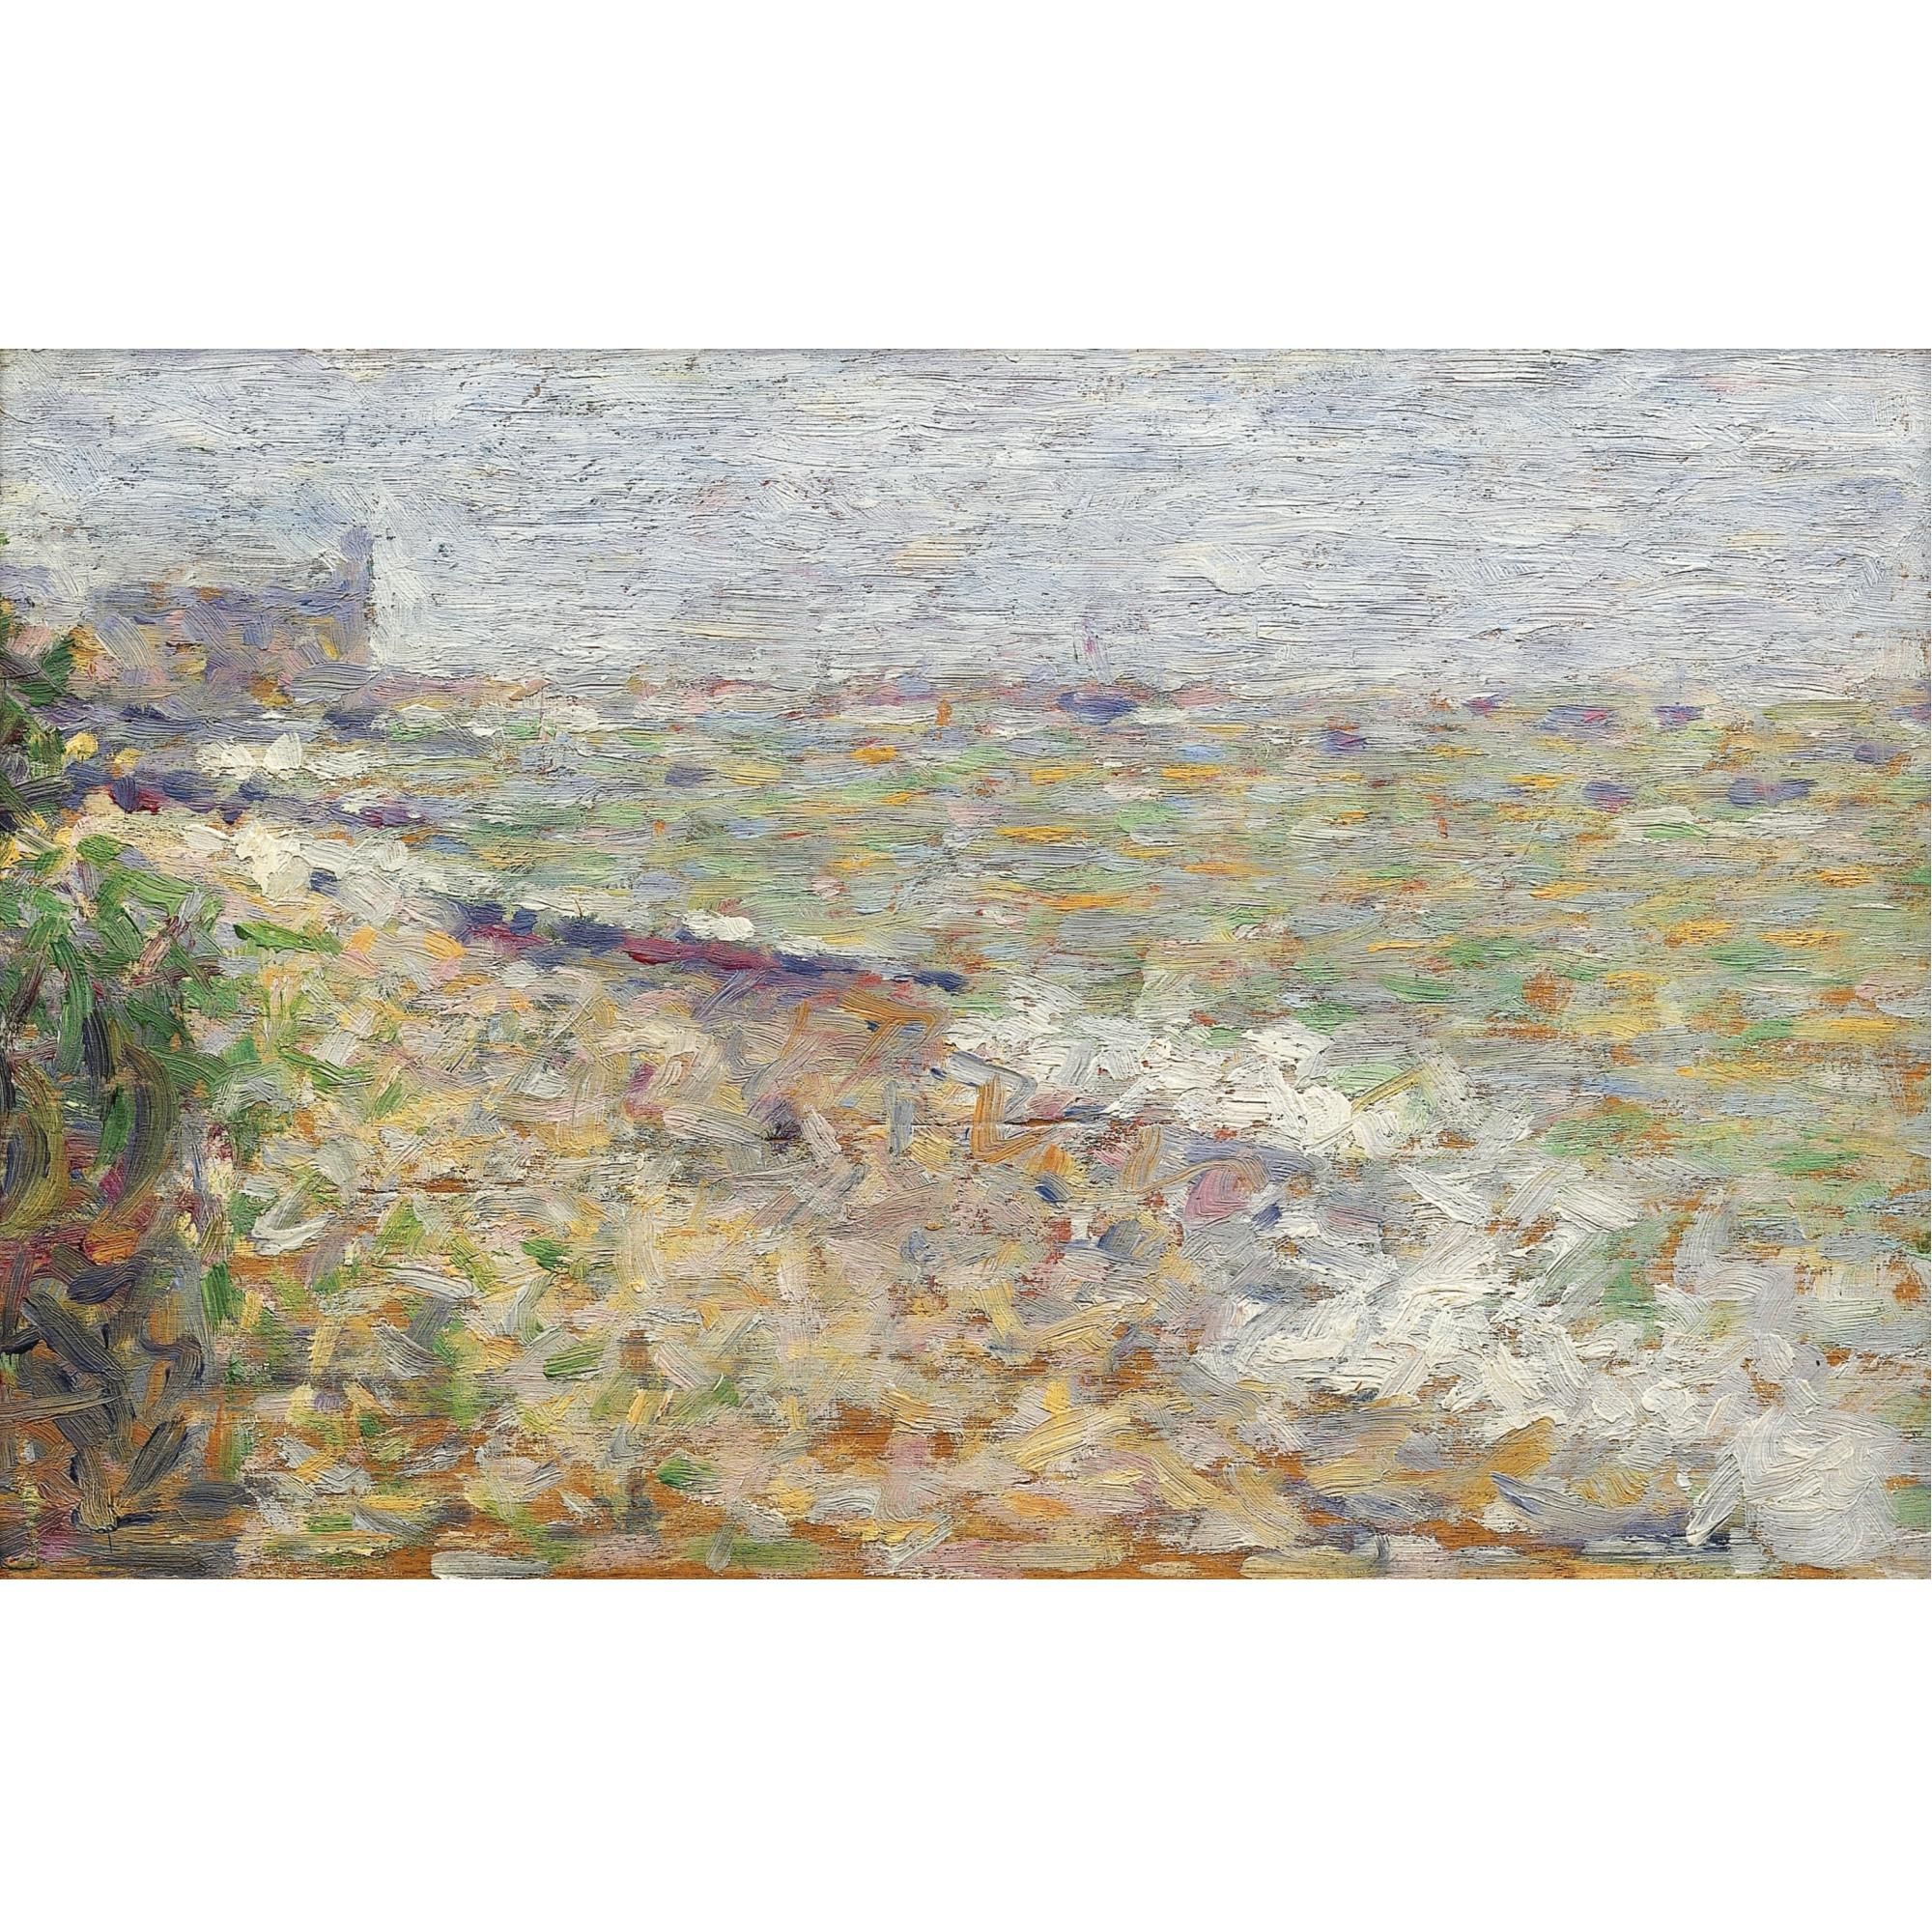 LE MOUILLAGE À GRANDCAMP by Georges Seurat, FullFormat:circa,year,1885